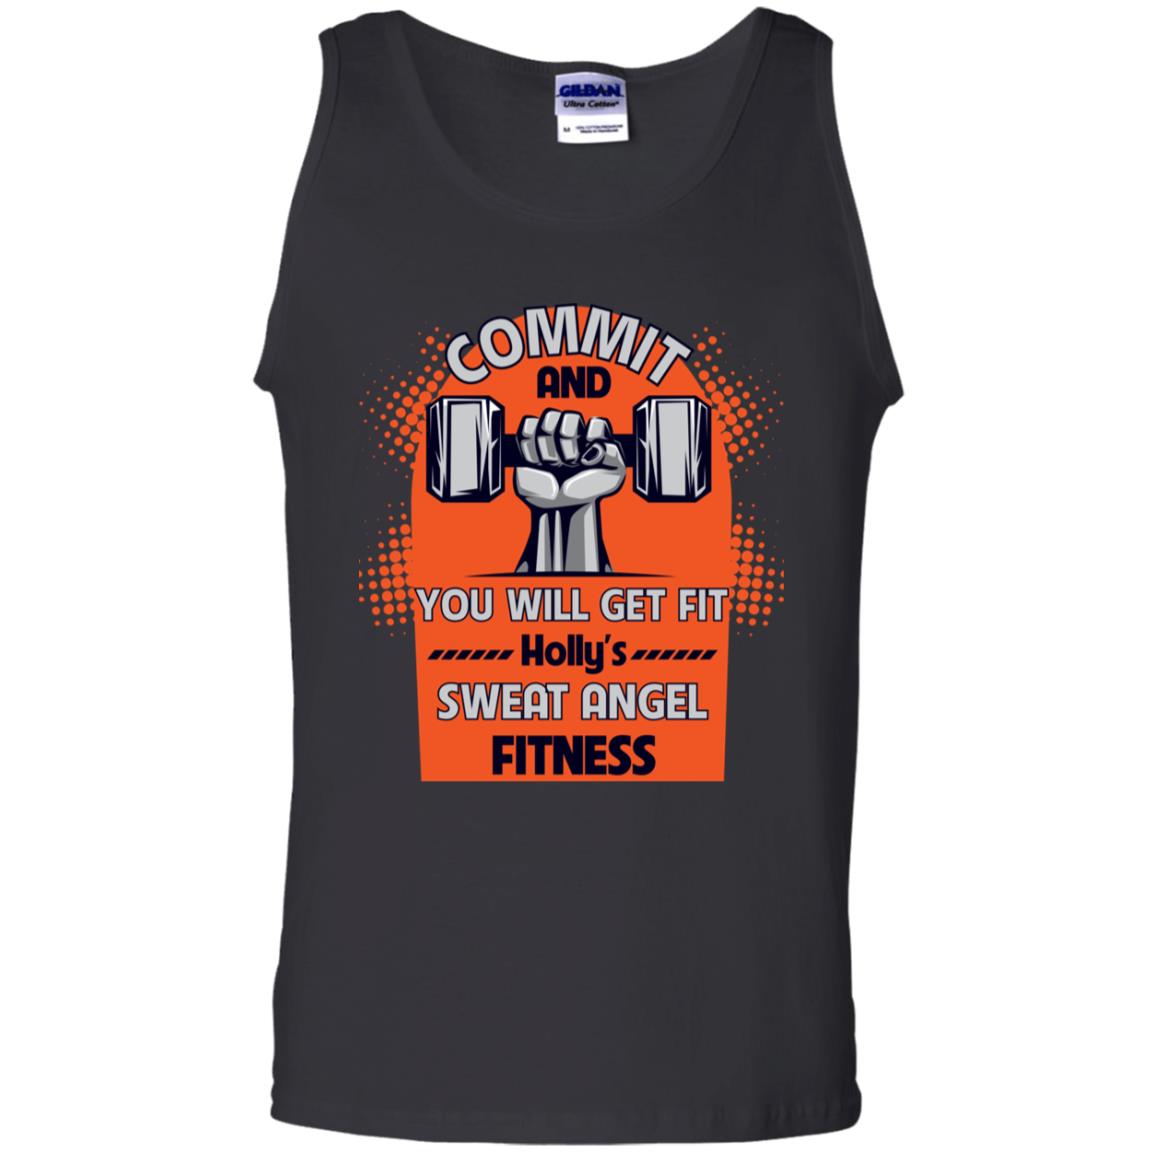 Commit And You Will Get Fit Holly's Sweat Angle Fitness ShirtG220 Gildan 100% Cotton Tank Top